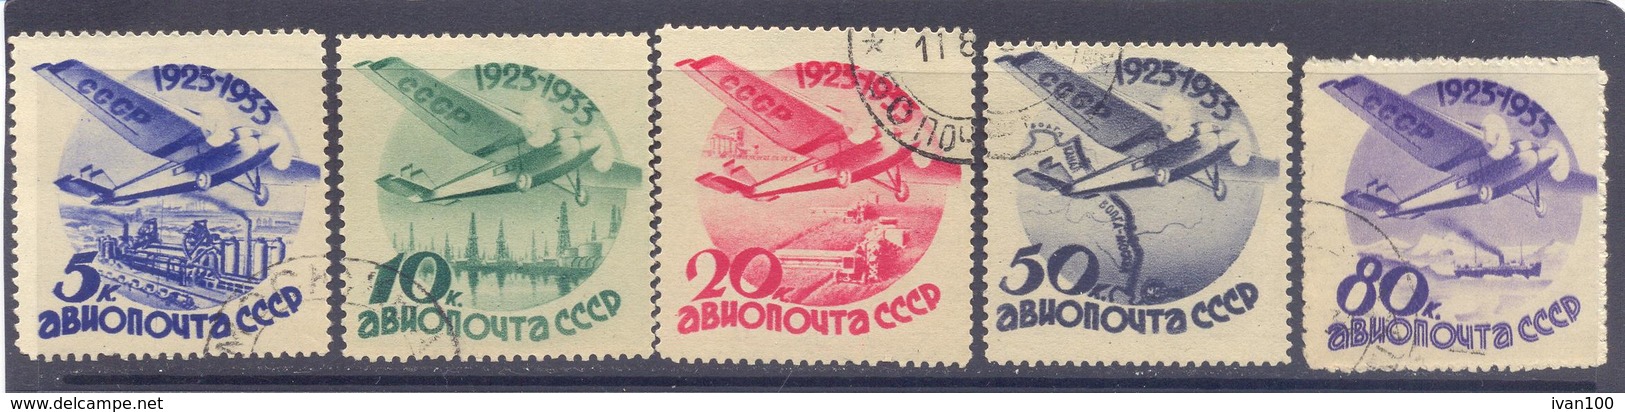 1934. USSR/Russia, 10th Anniv. Of Soviet Civil Aviation And USSR Air-mail Service, Mich.462/66v, Used - Usados